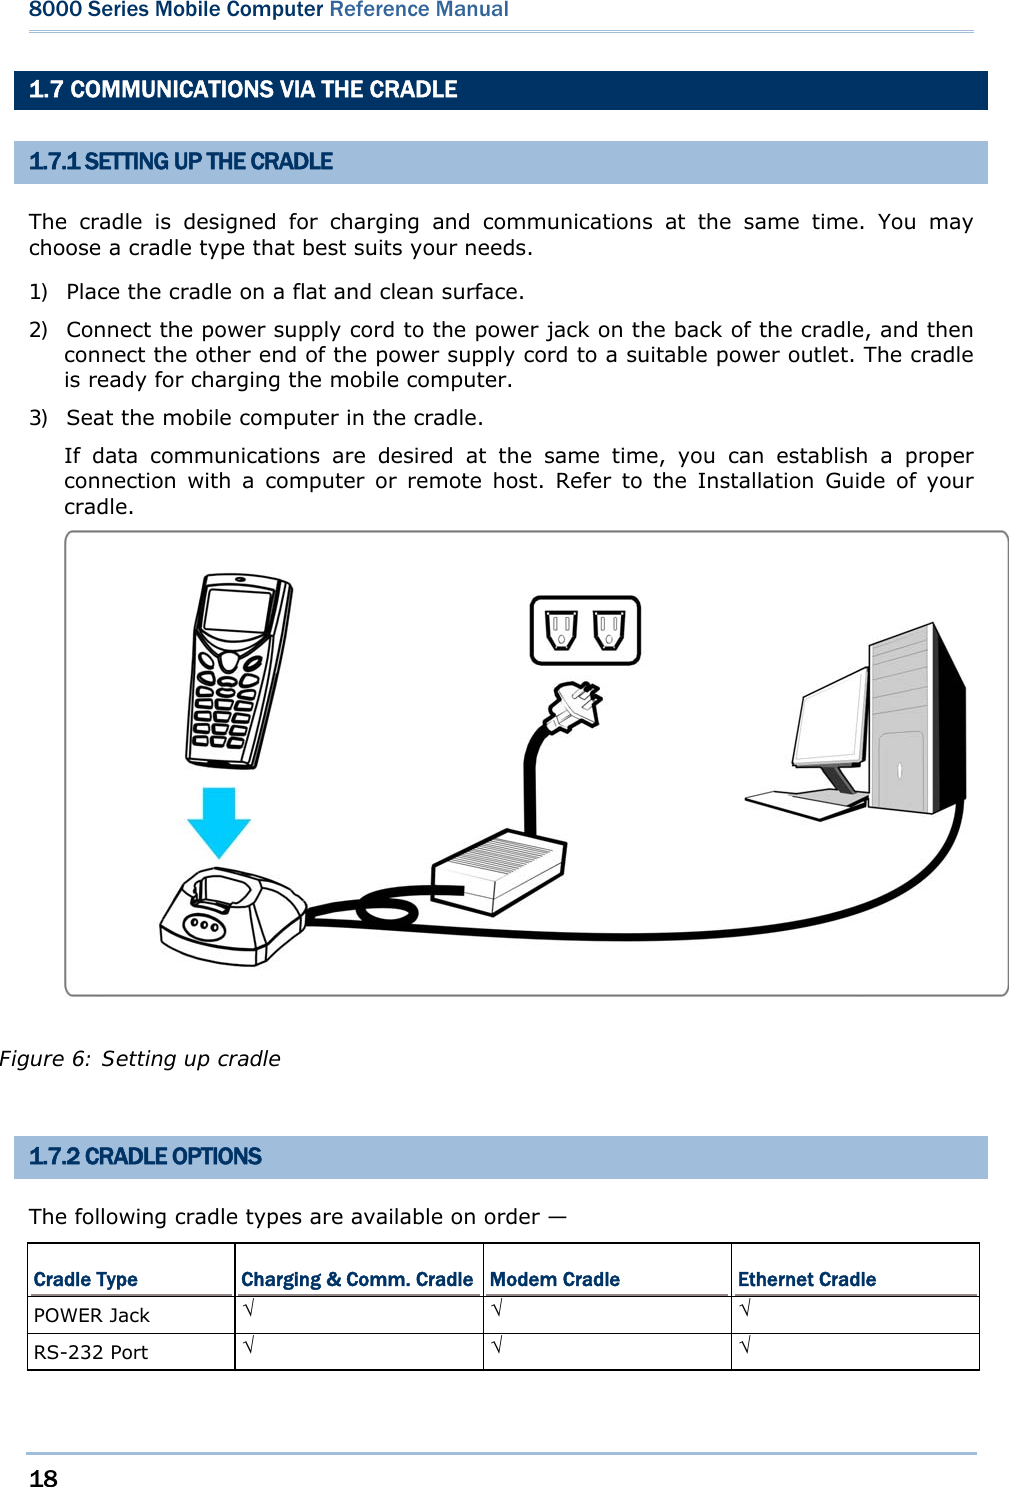 18  8000 Series Mobile Computer Reference Manual  1.7 COMMUNICATIONS VIA THE CRADLE 1.7.1 SETTING UP THE CRADLE The cradle is designed for charging and communications at the same time. You may choose a cradle type that best suits your needs. 1) Place the cradle on a flat and clean surface. 2) Connect the power supply cord to the power jack on the back of the cradle, and then connect the other end of the power supply cord to a suitable power outlet. The cradle is ready for charging the mobile computer. 3) Seat the mobile computer in the cradle.   If data communications are desired at the same time, you can establish a proper connection with a computer or remote host. Refer to the Installation Guide of your cradle.      1.7.2 CRADLE OPTIONS The following cradle types are available on order — Cradle Type  Charging &amp; Comm. Cradle Modem Cradle  Ethernet Cradle POWER Jack  √ √ √ RS-232 Port  √ √ √  Figure 6: Setting up cradle 